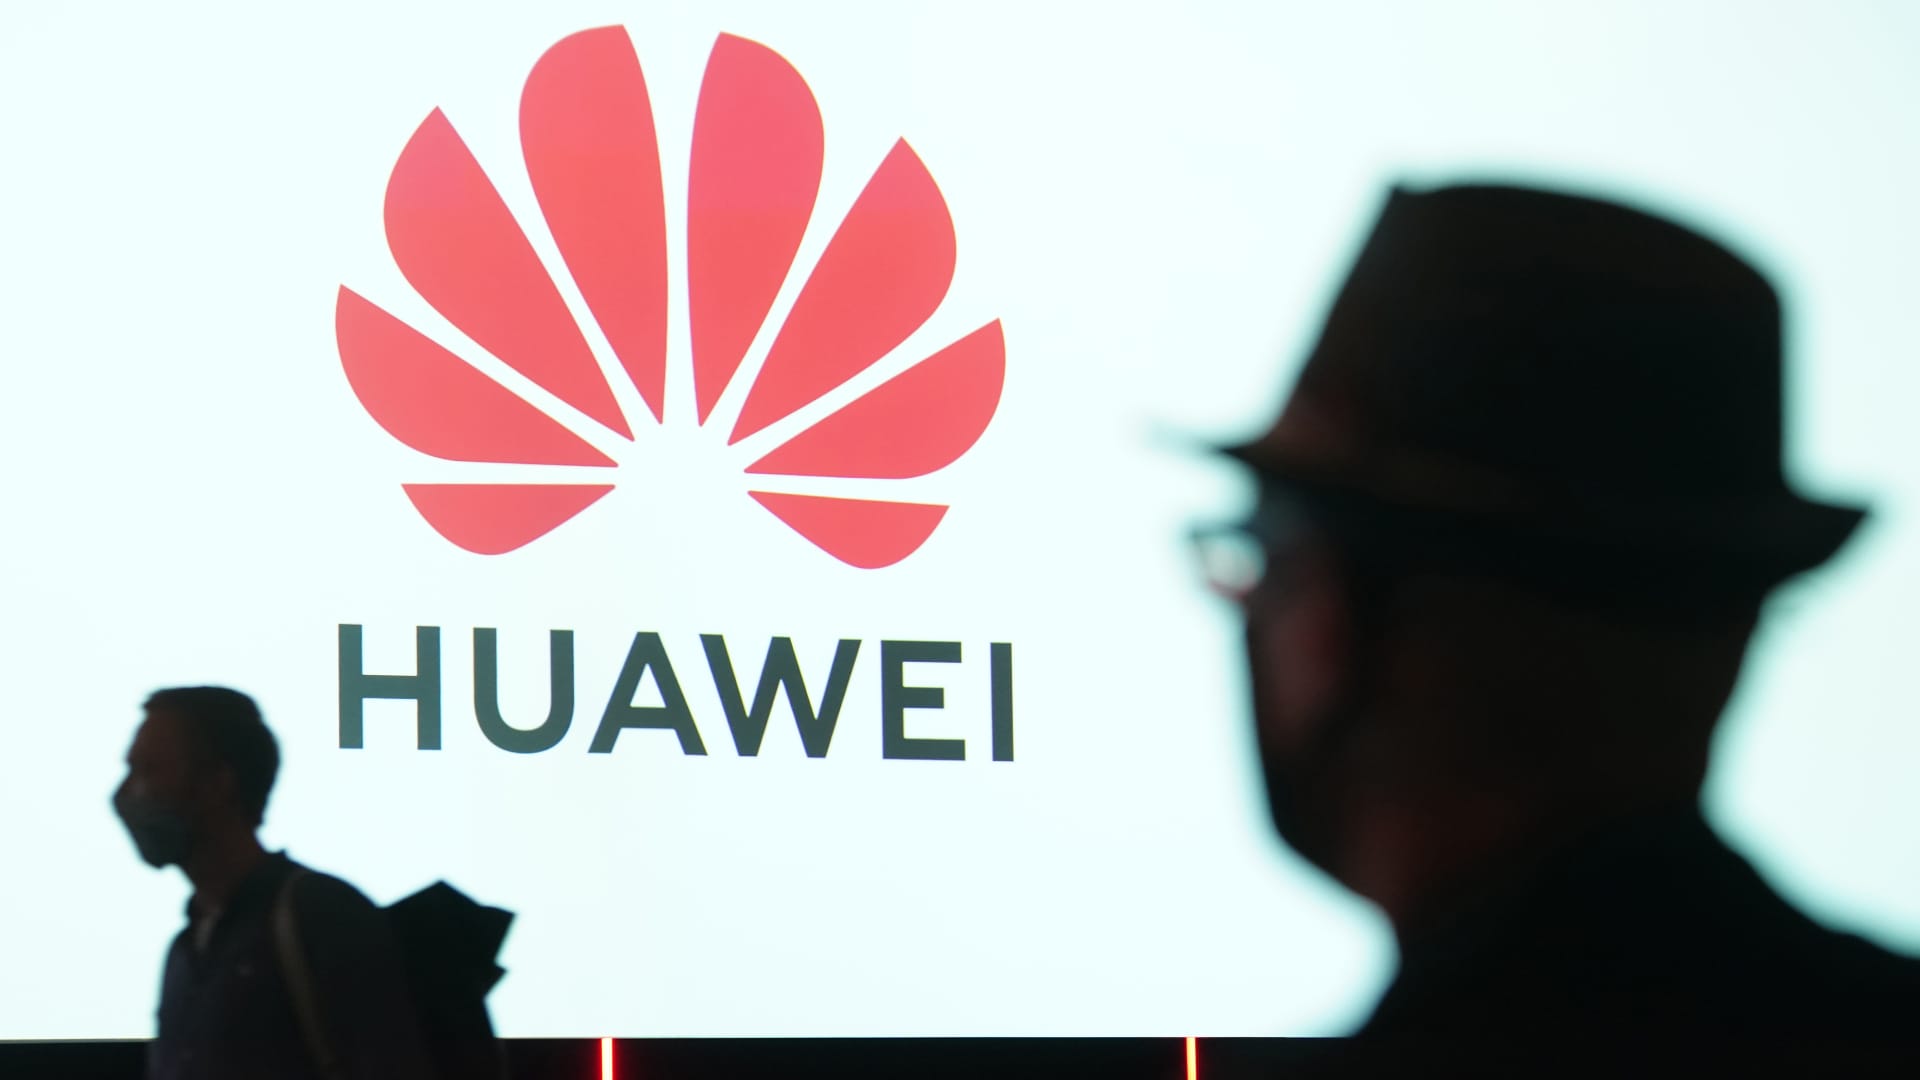 US cancels some export licenses to promote chips to China’s Huawei